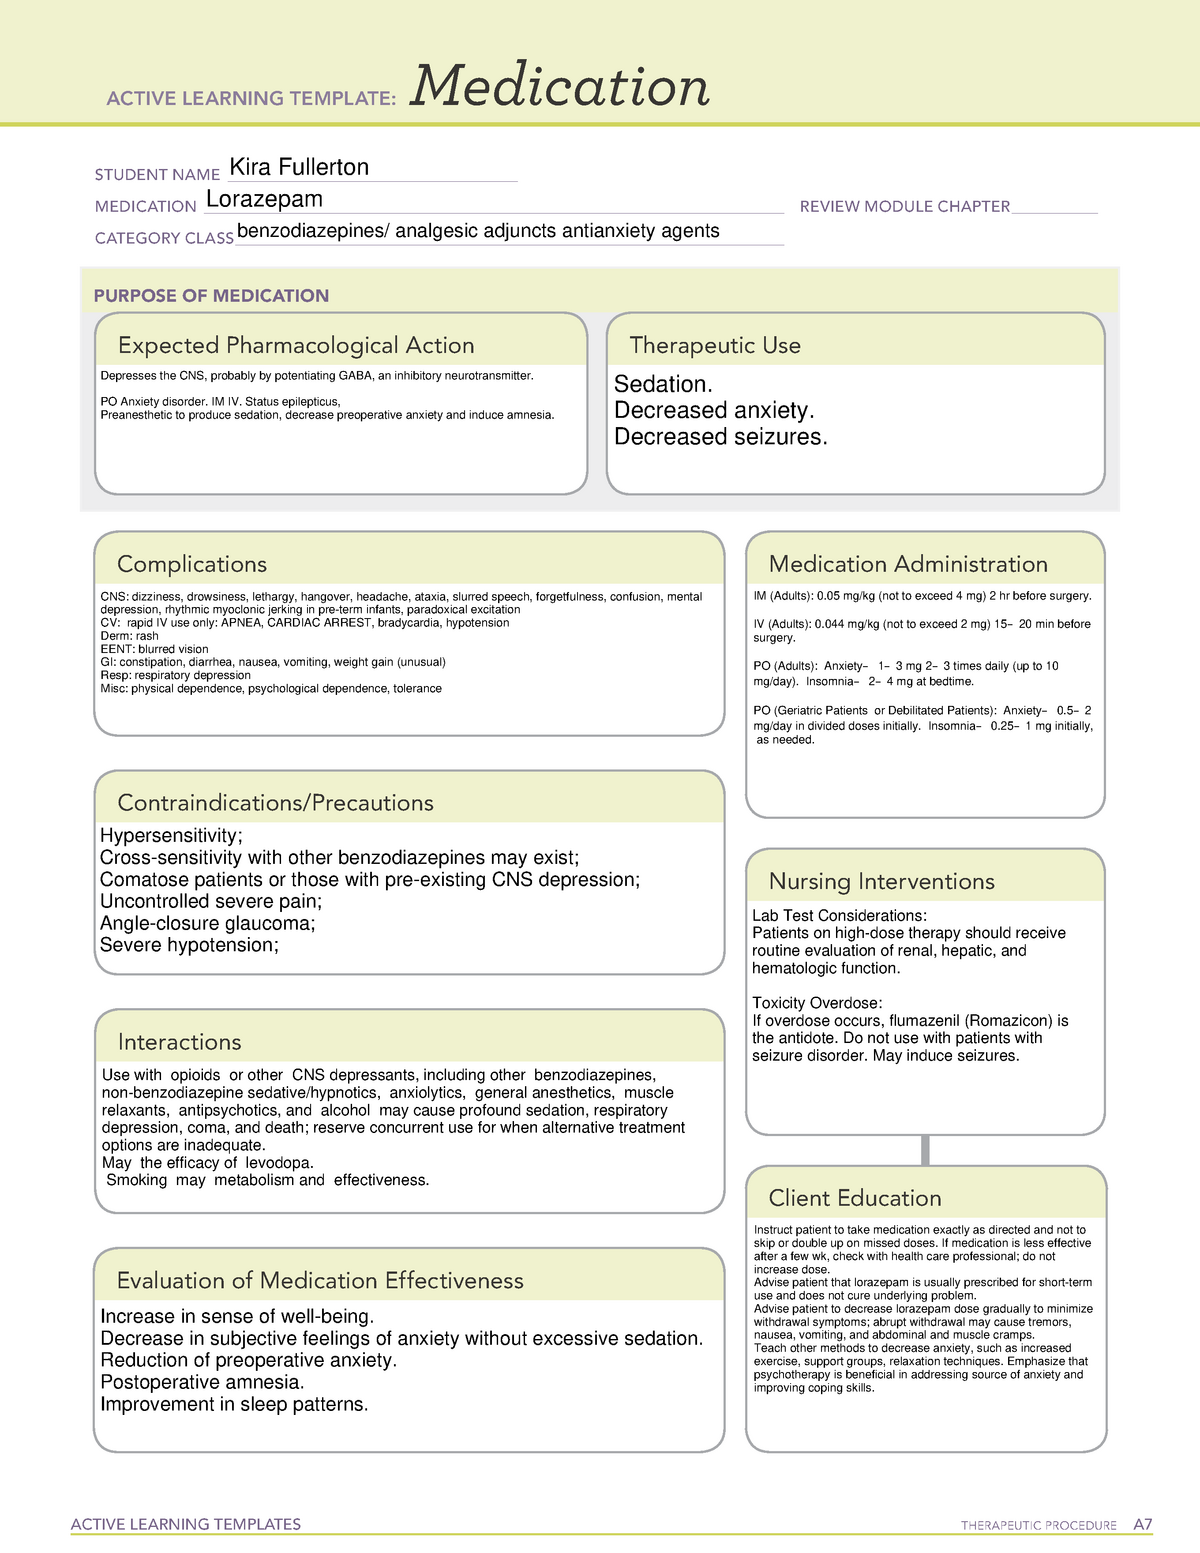 MED Lorazepam ATI medications sheet ACTIVE LEARNING TEMPLATES